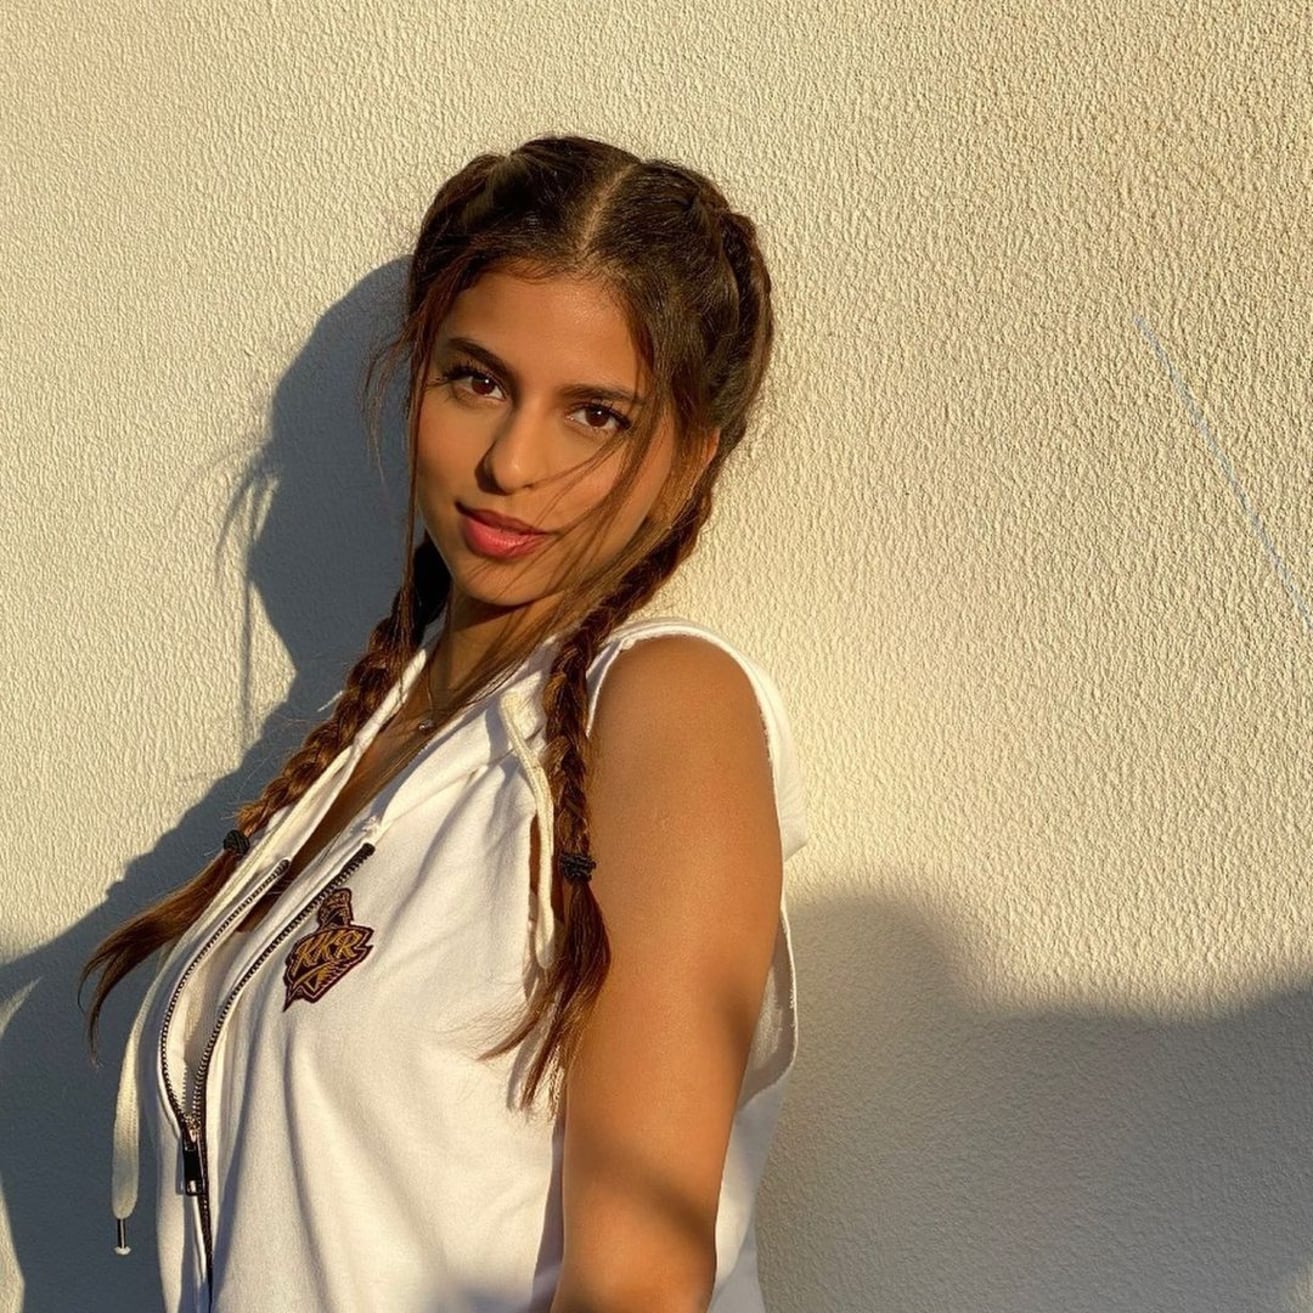 Suhana Khan Is Stunning And Her Instagram Pictures Are Proof Take A Look News18